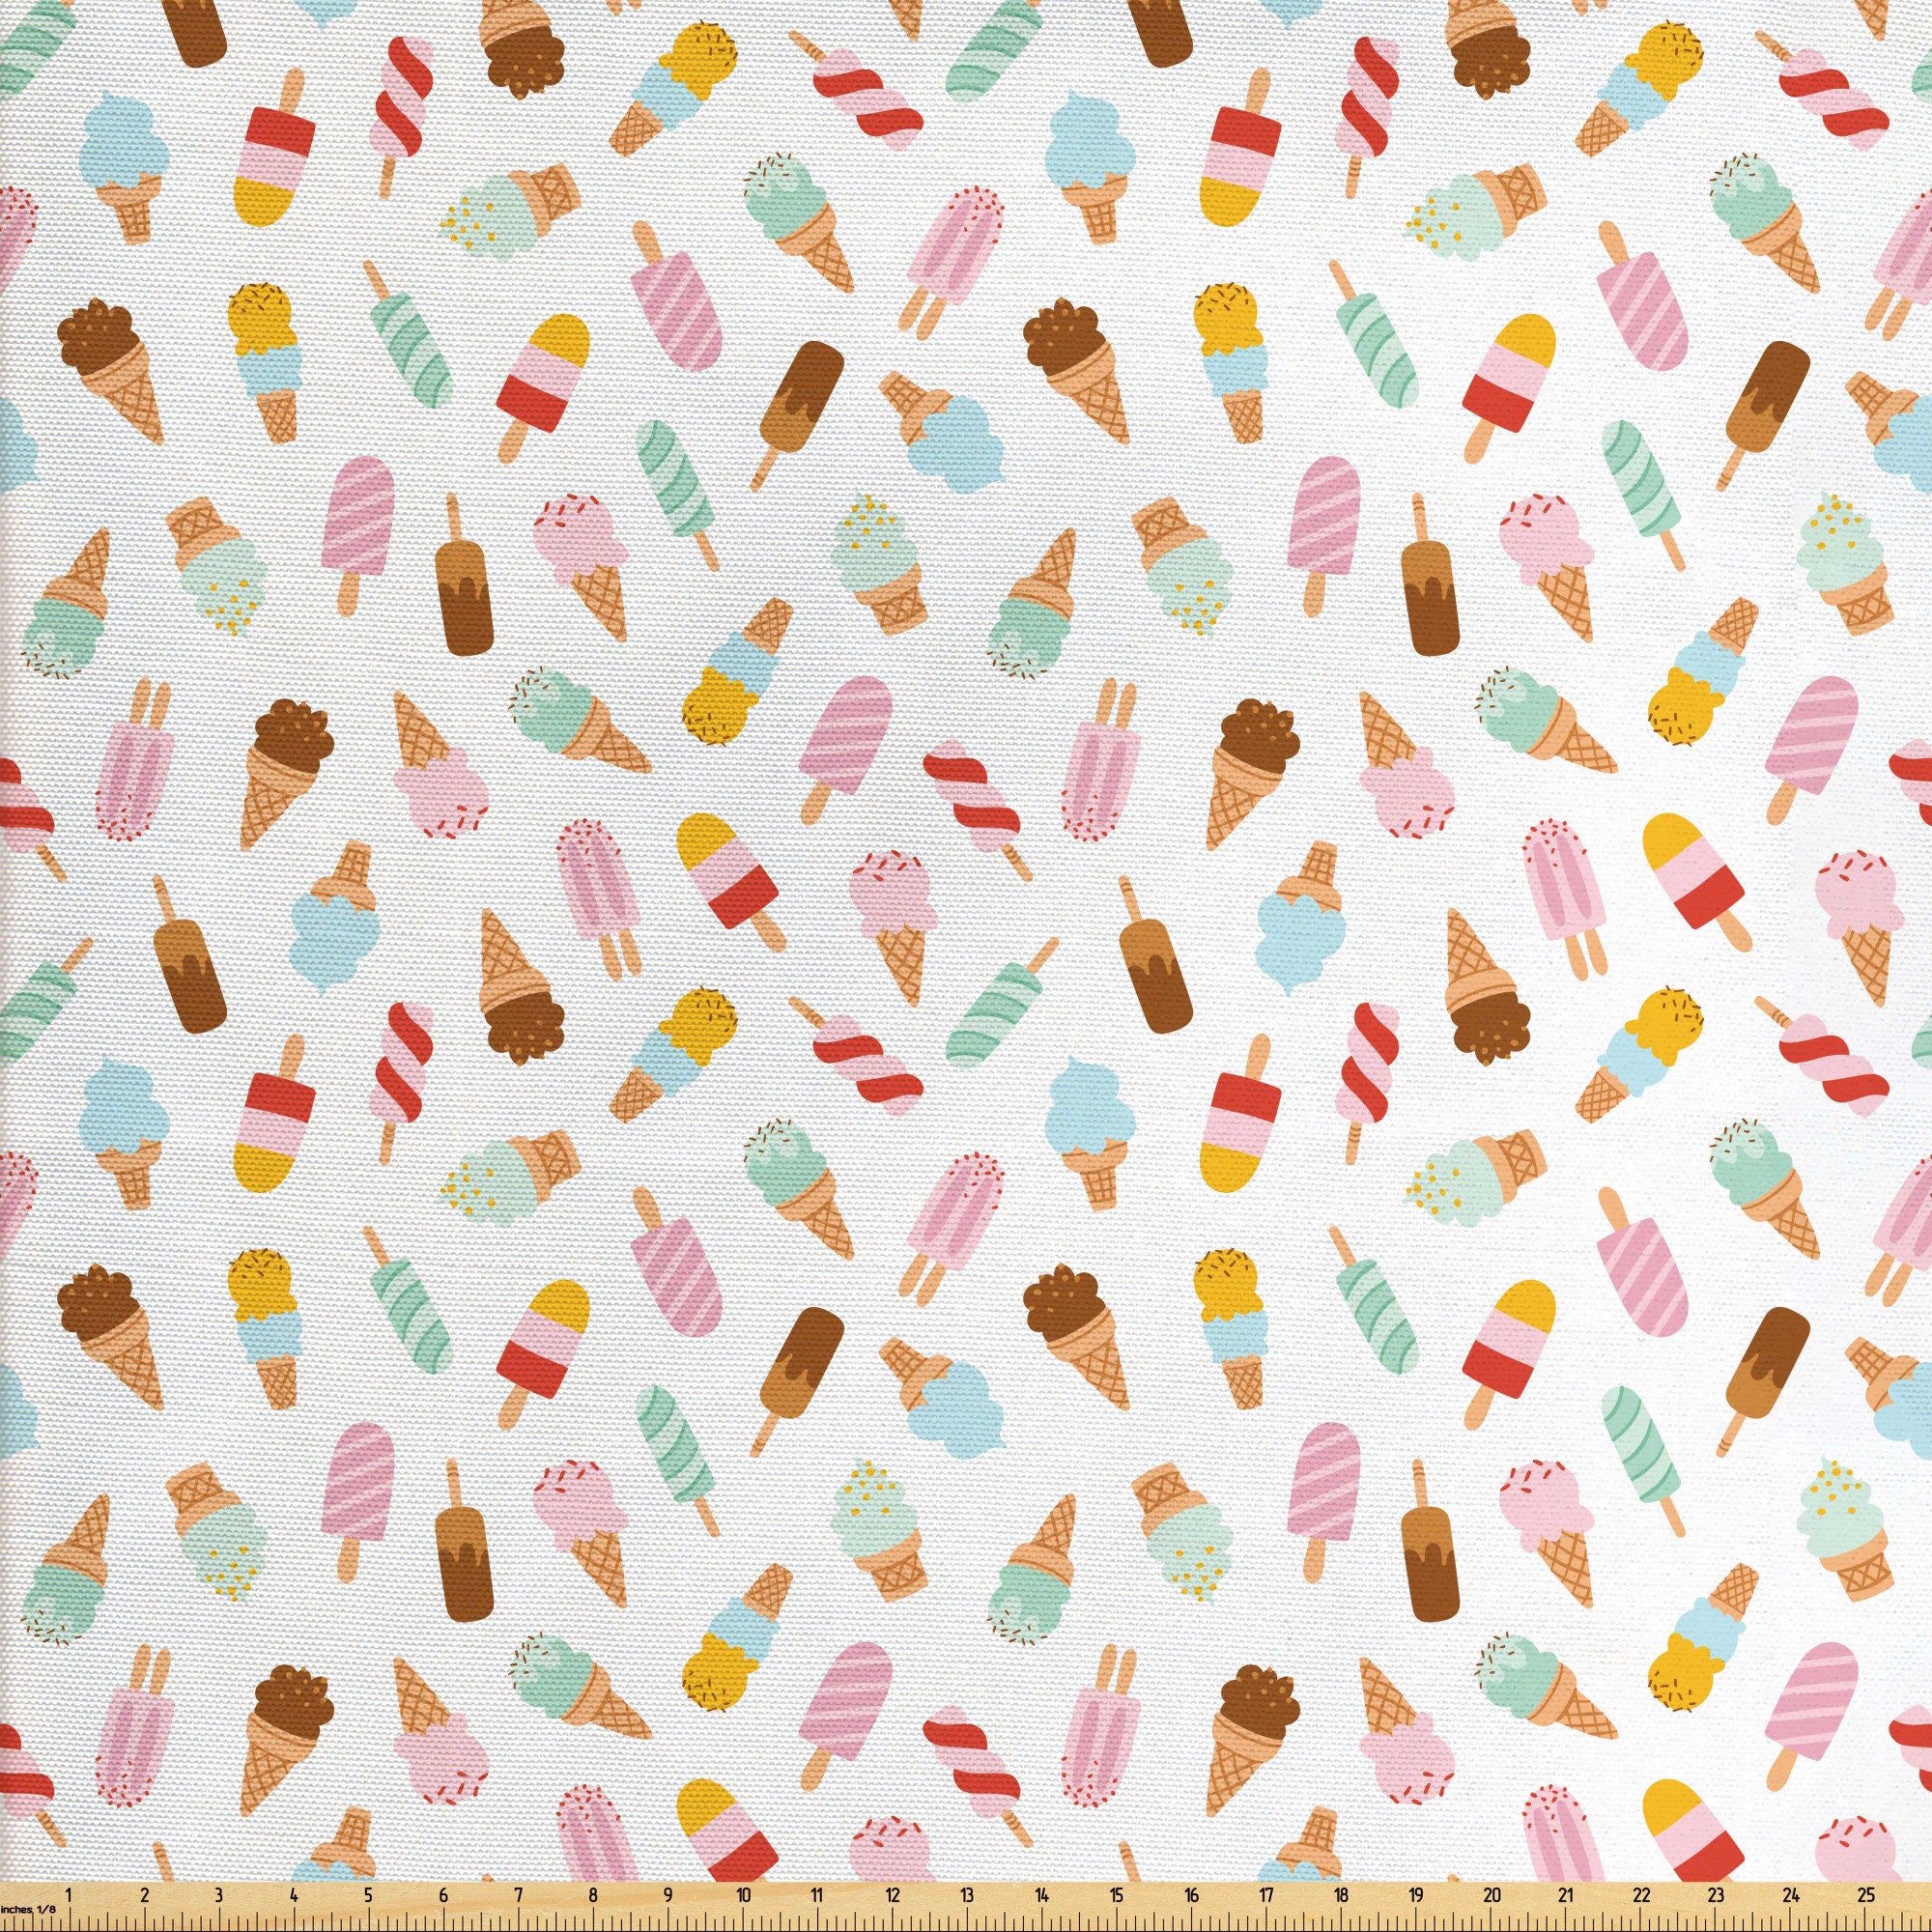 Ice Cream Fabric by the Yard Ice Cream Shop Cones Popsicles - Etsy